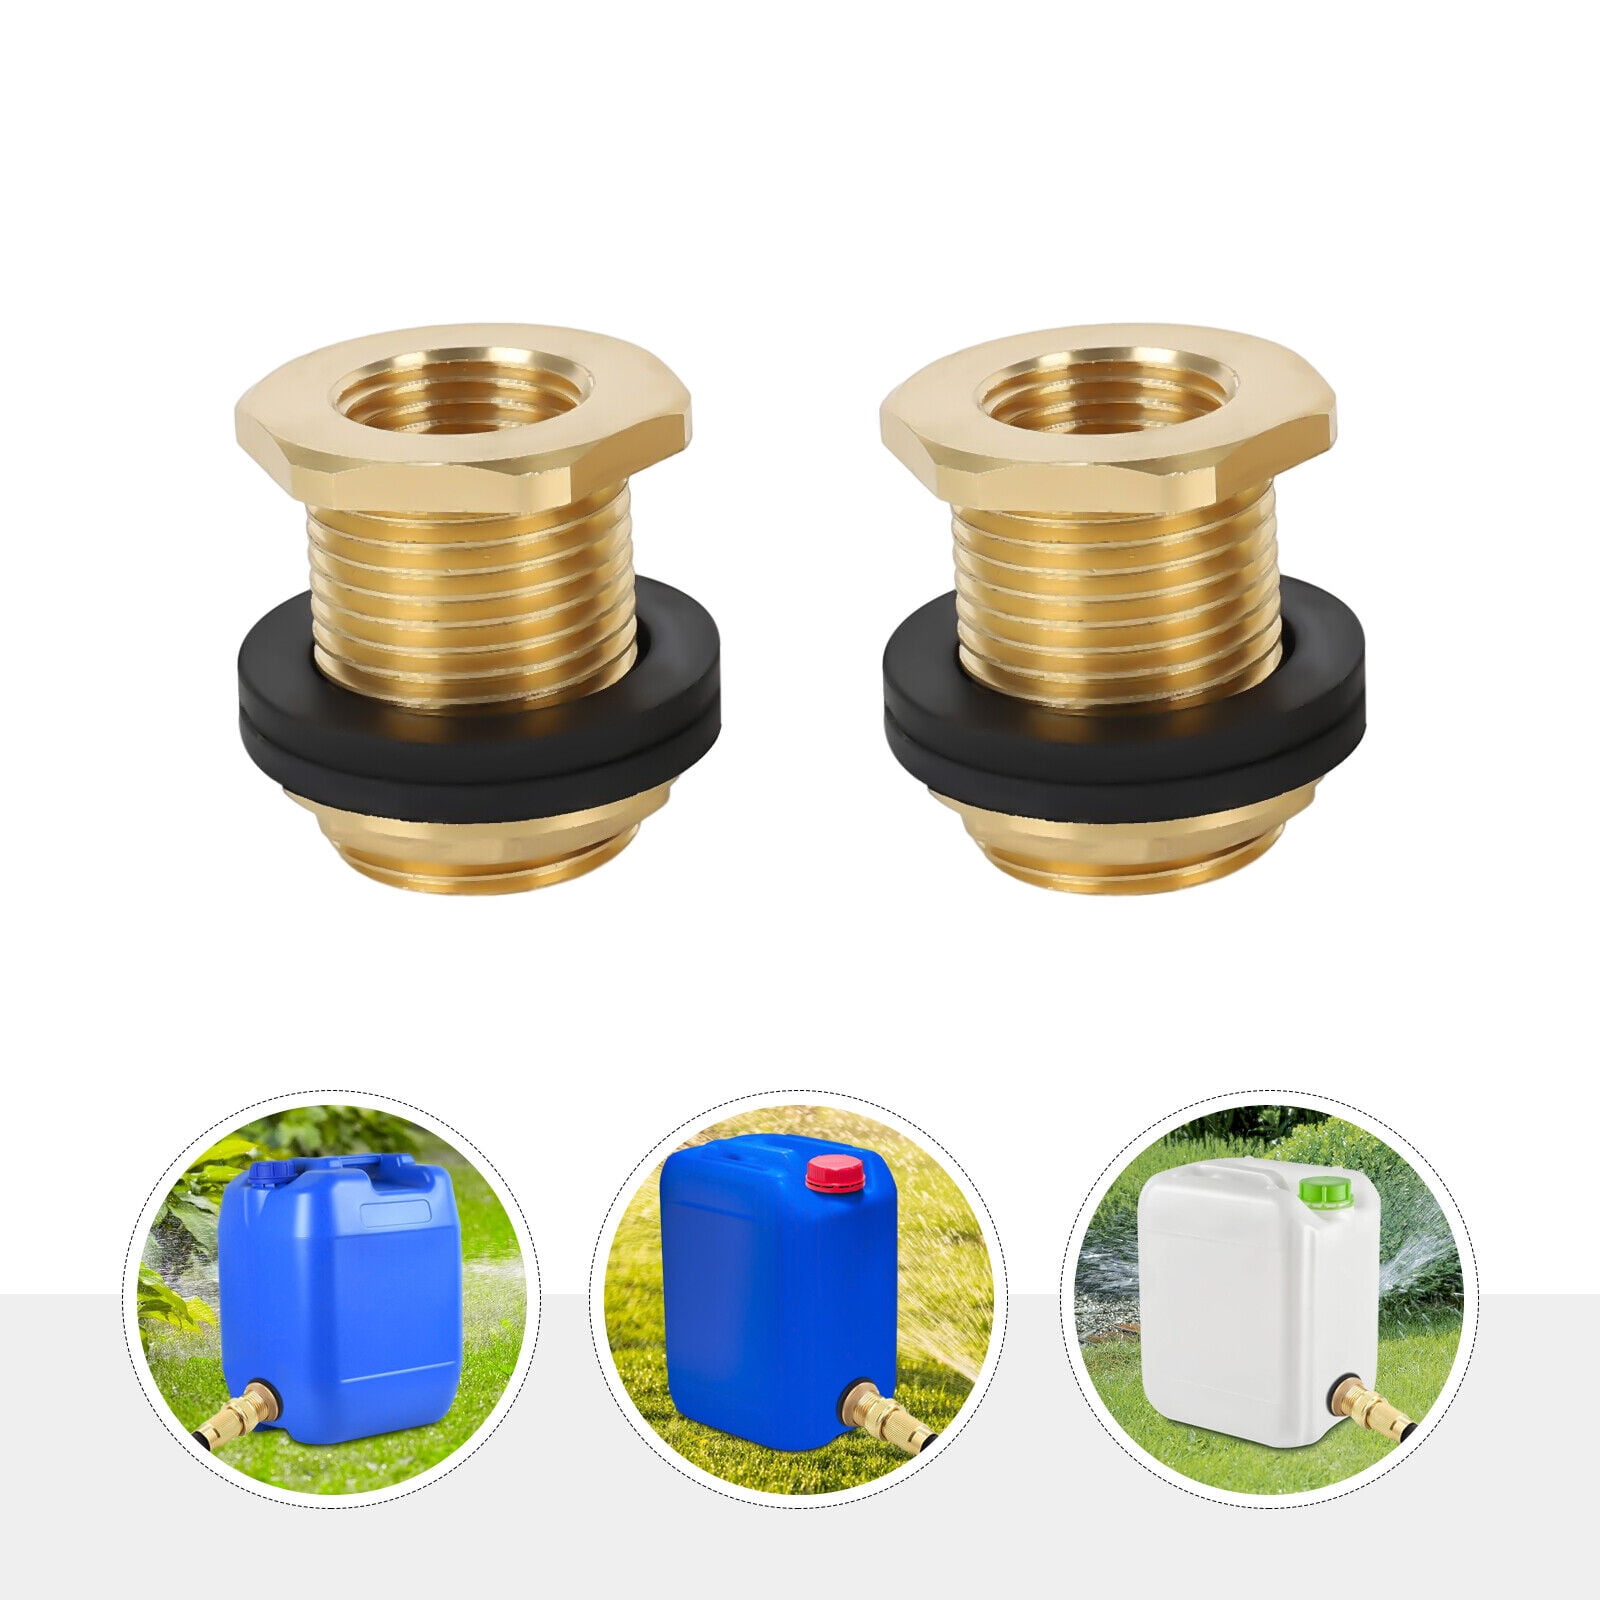 Hourleey Solid Brass Bulkhead Fitting, 1/2 Female 3/4 Male GHT Solid  Brass Water Tank Connector Theaded with Rubber Ring (2-pack)